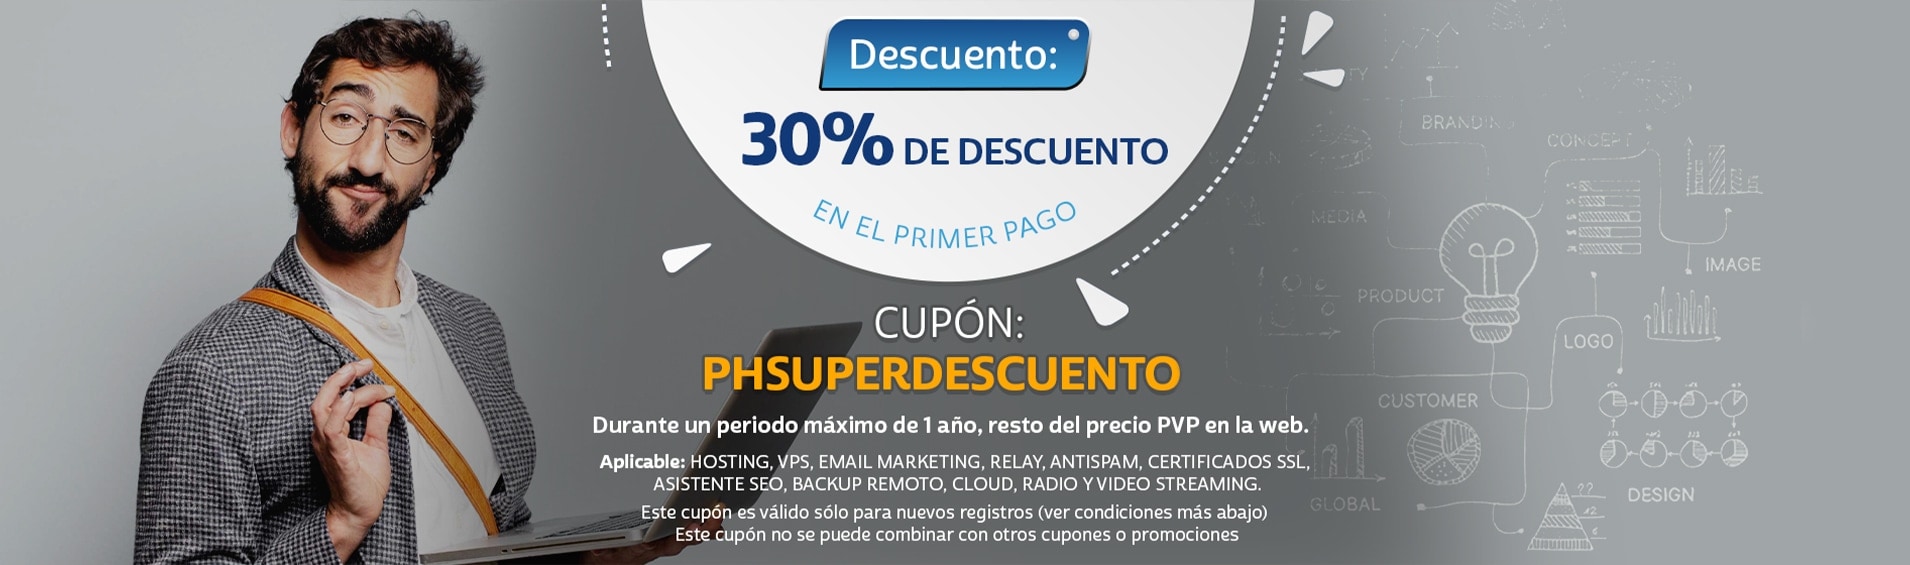 cupon descuento profesional hosting 30%